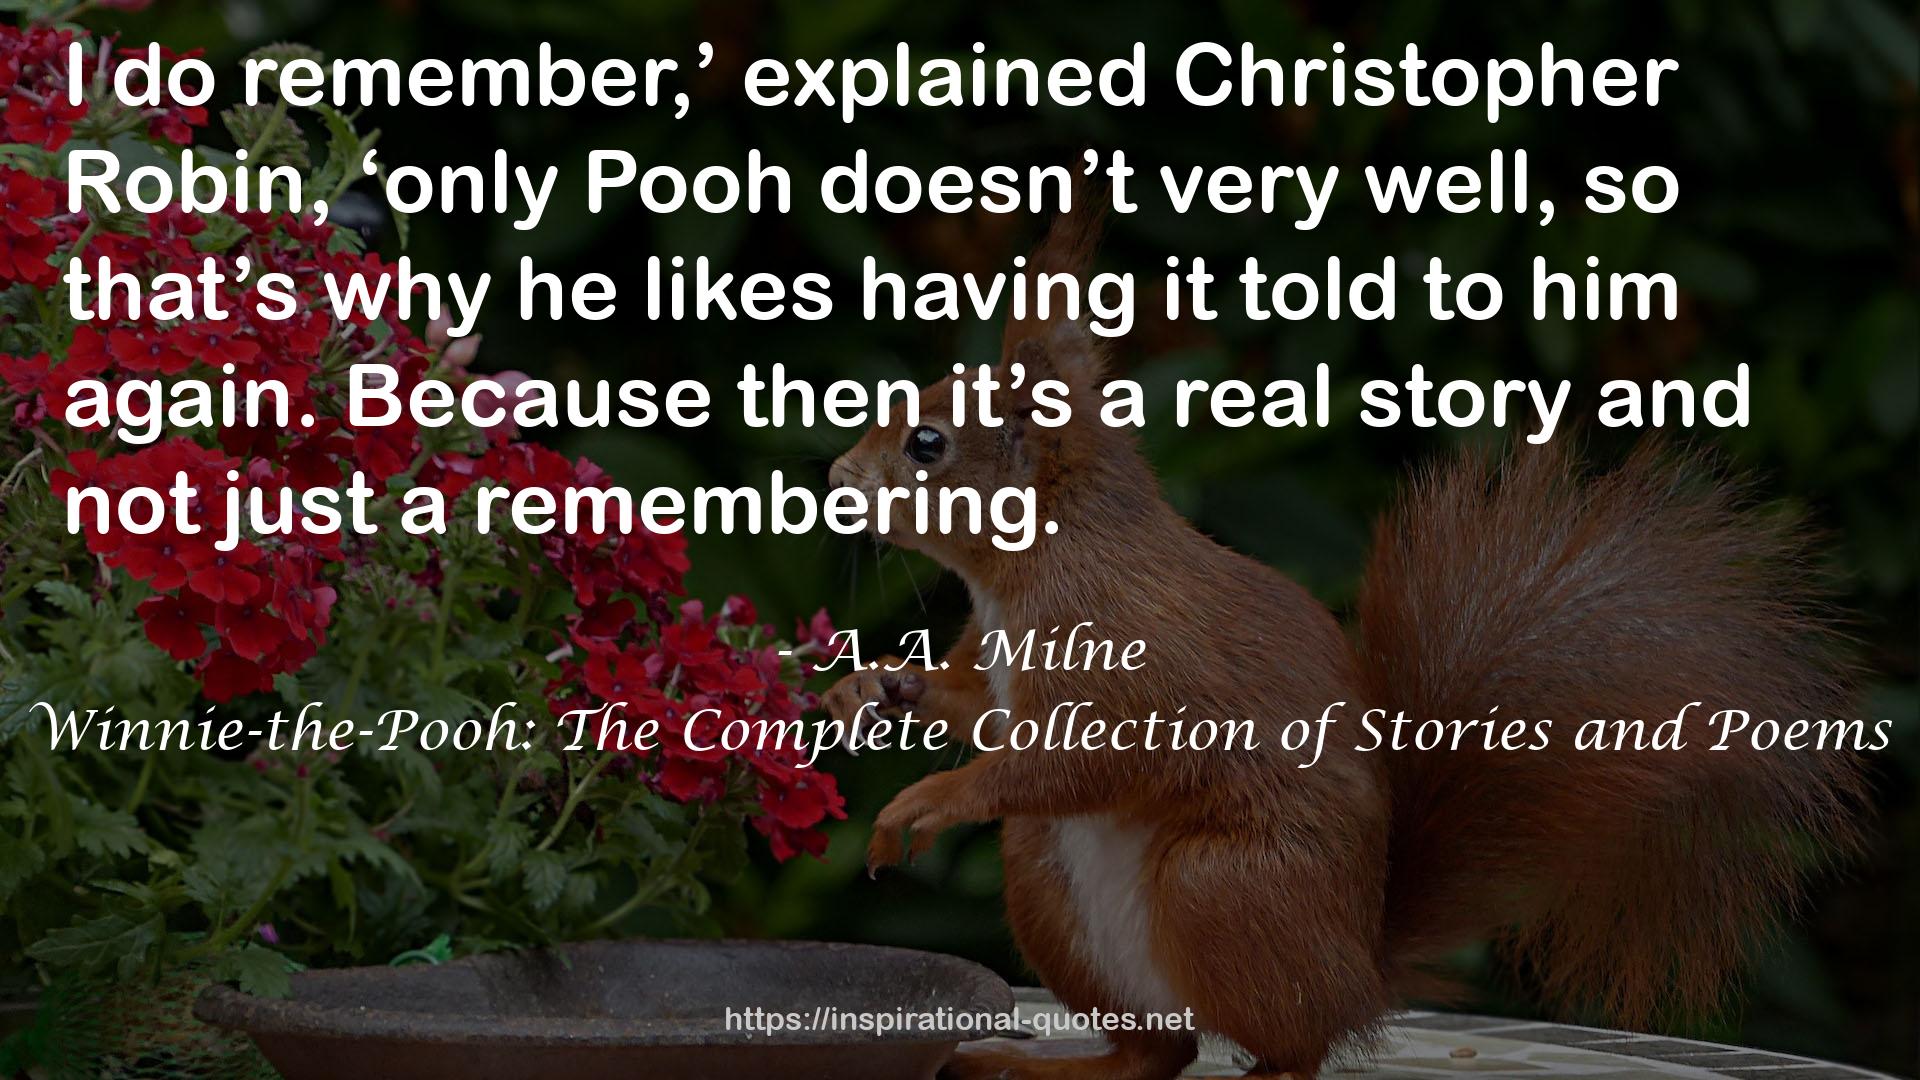 Winnie-the-Pooh: The Complete Collection of Stories and Poems QUOTES